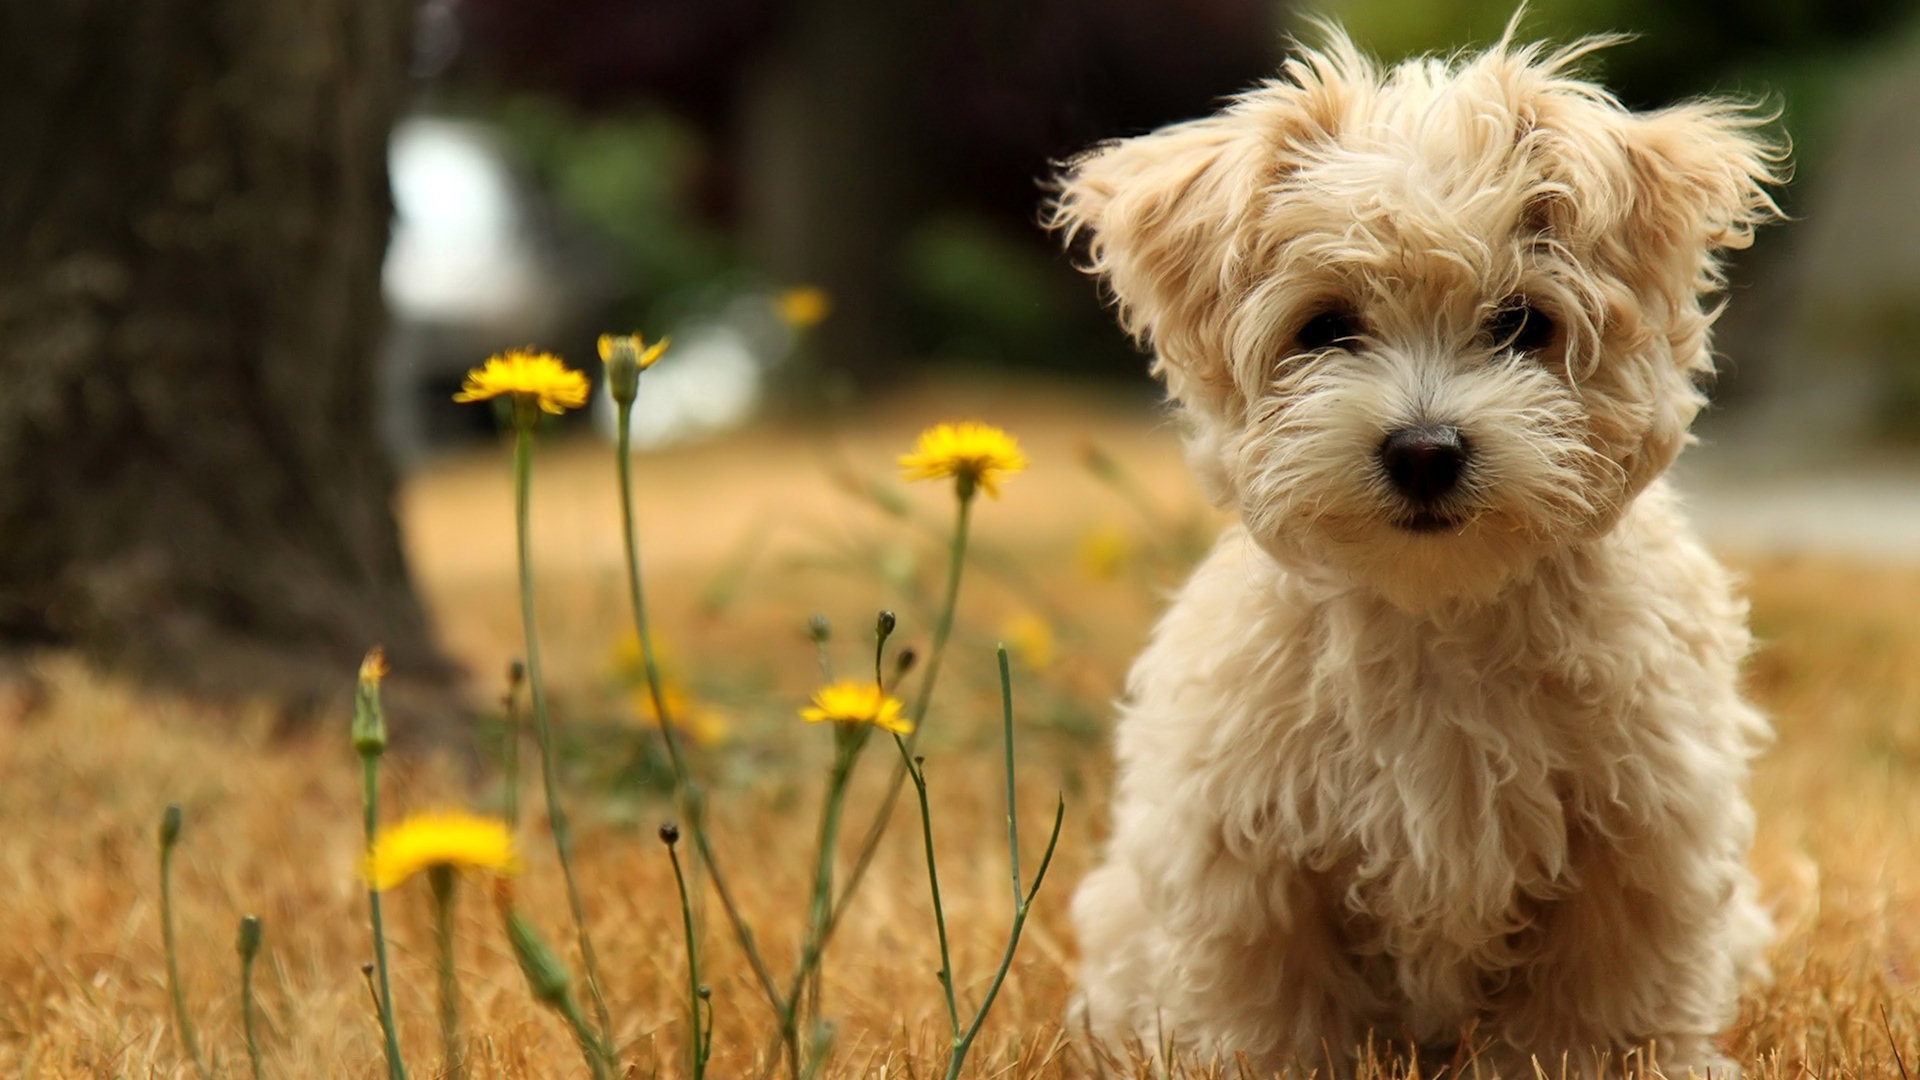 Mobile Desktop Background Cute Puppy Dogs Images Download